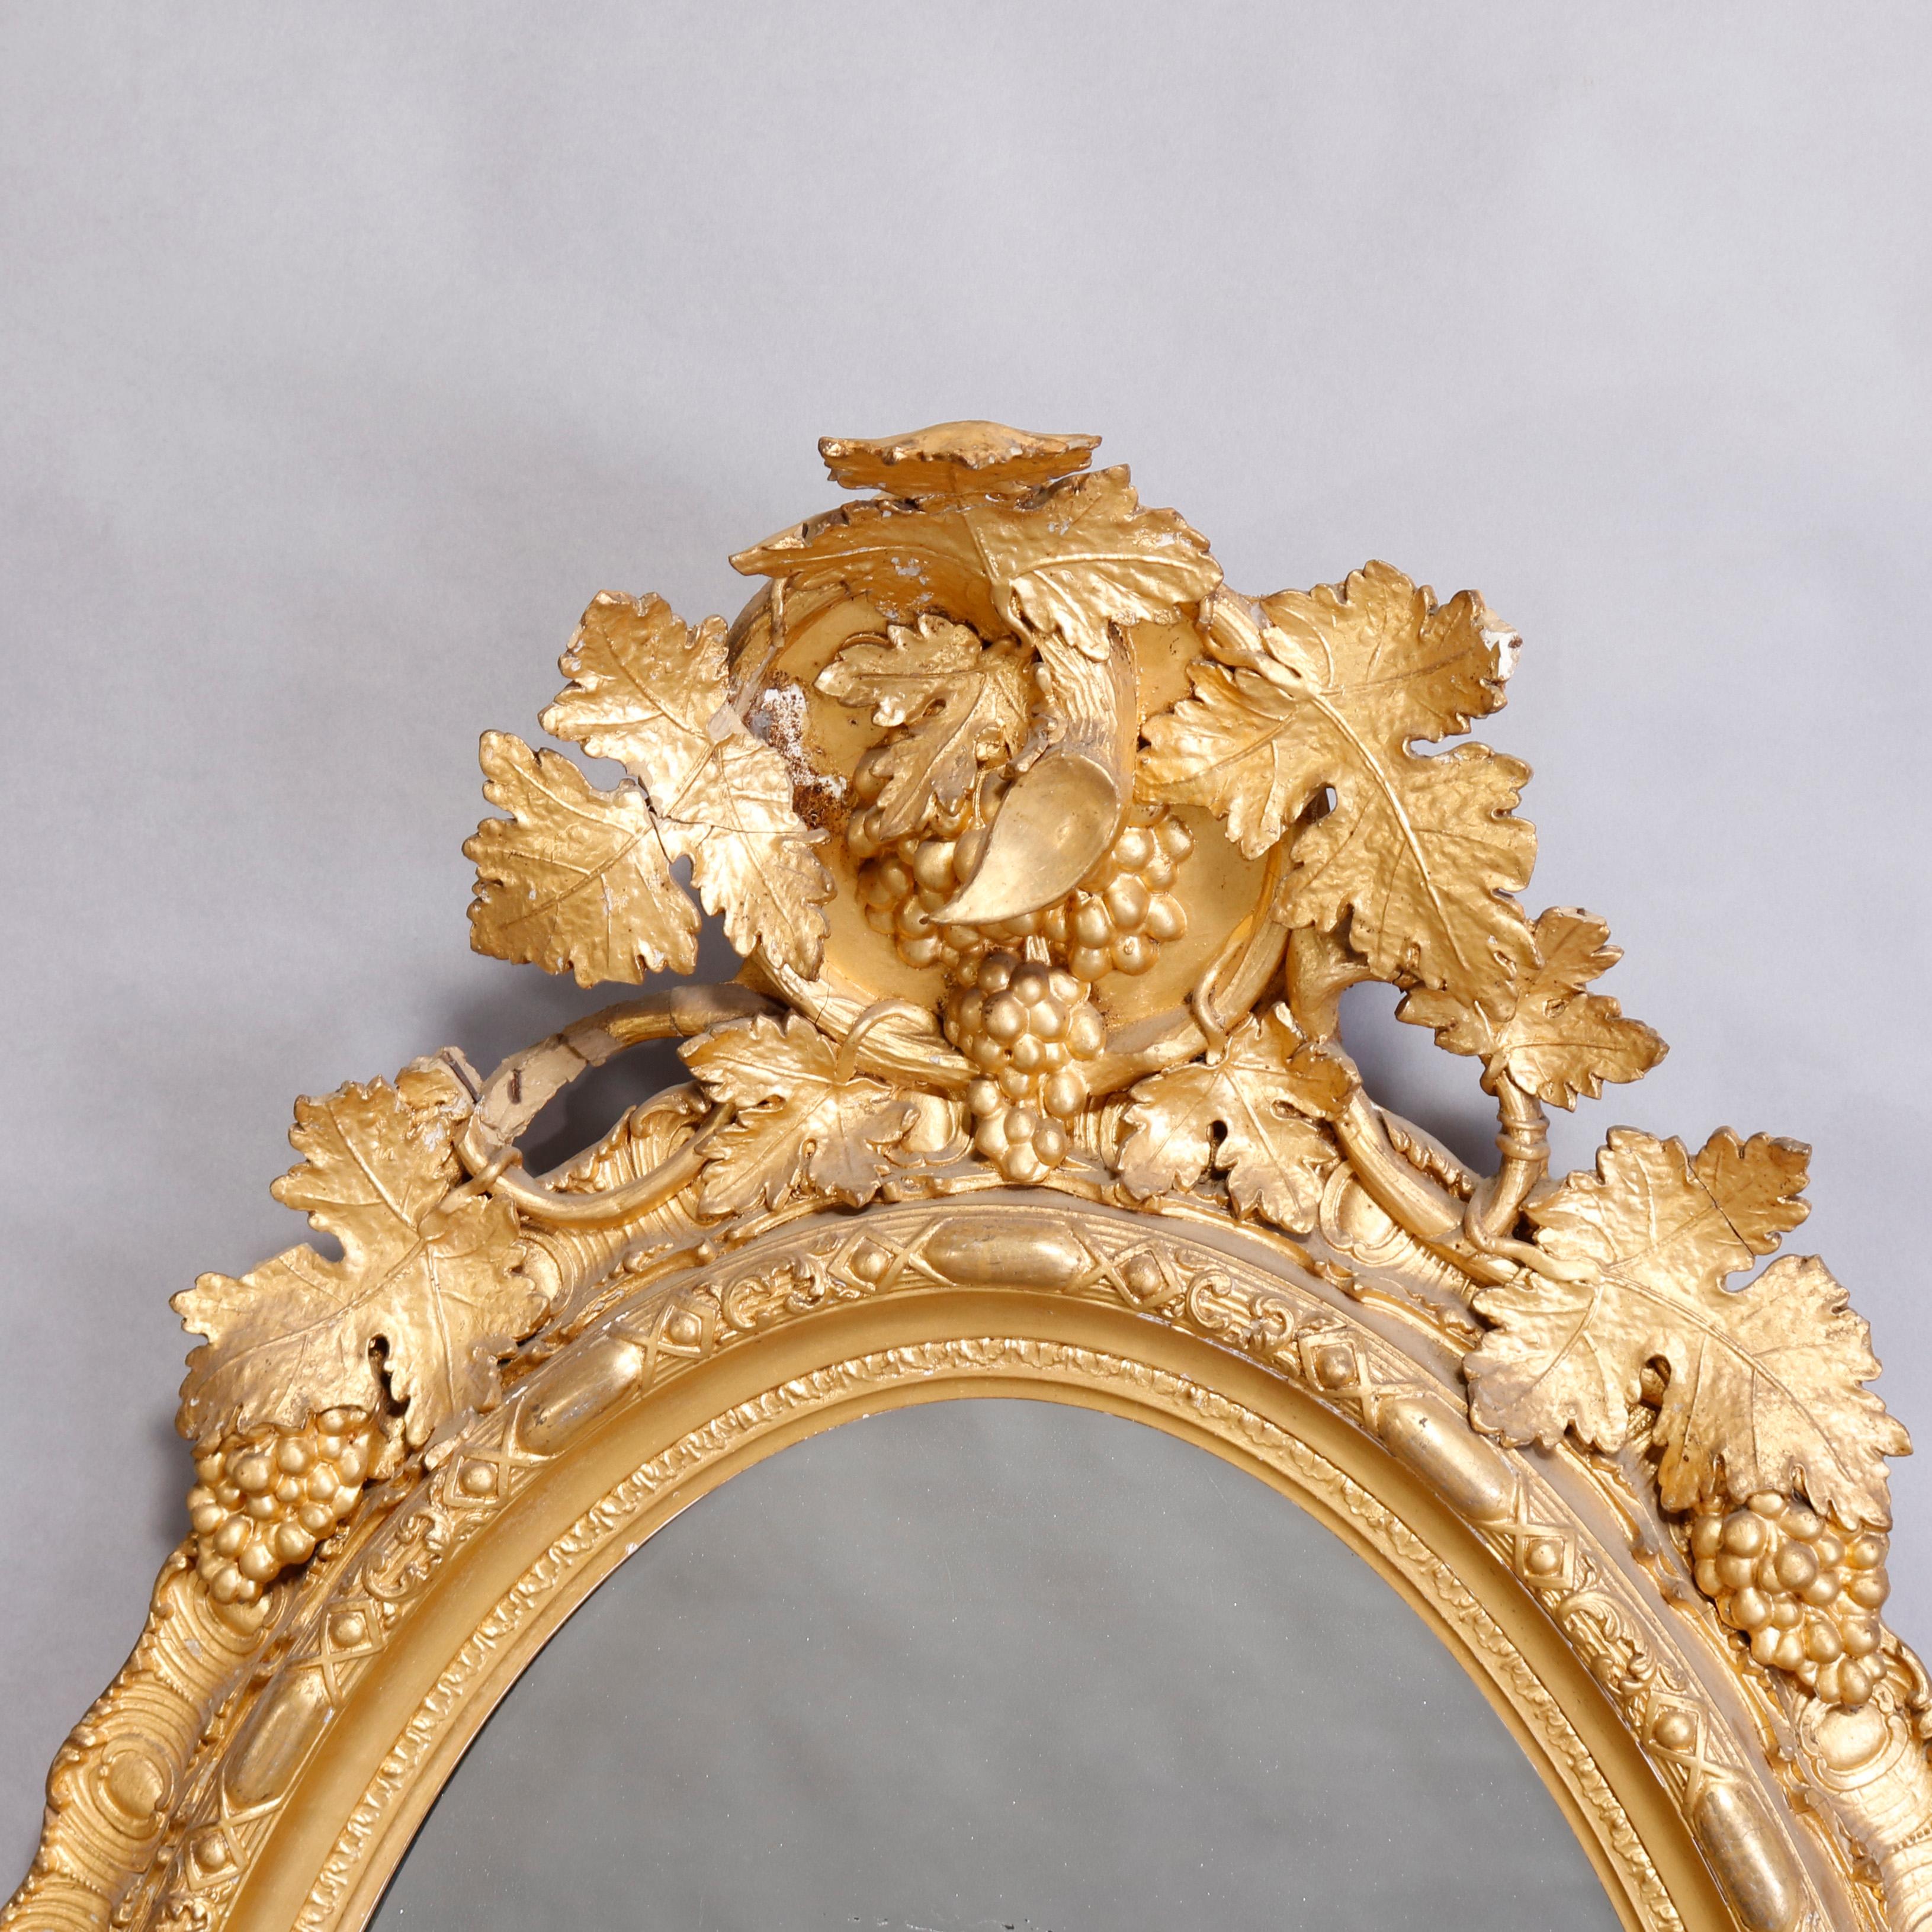 An antique and large French Rococo wall mirror offers oval form with carved giltwood frame having foliate grape and leaf elements, circa 1880.

Measures: 64.5